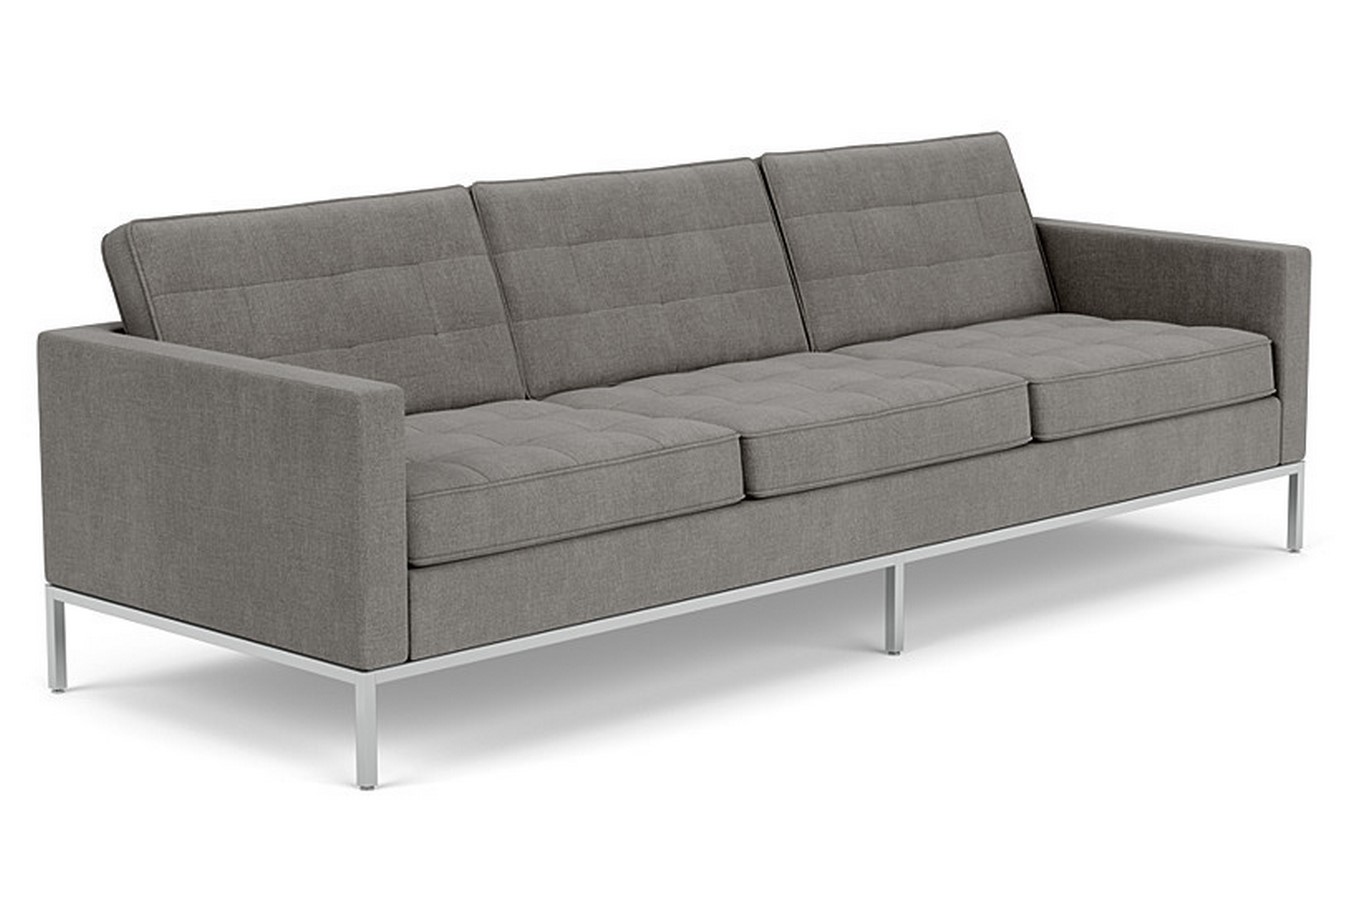 10 Sofa designs everyone should know about - Sheet2